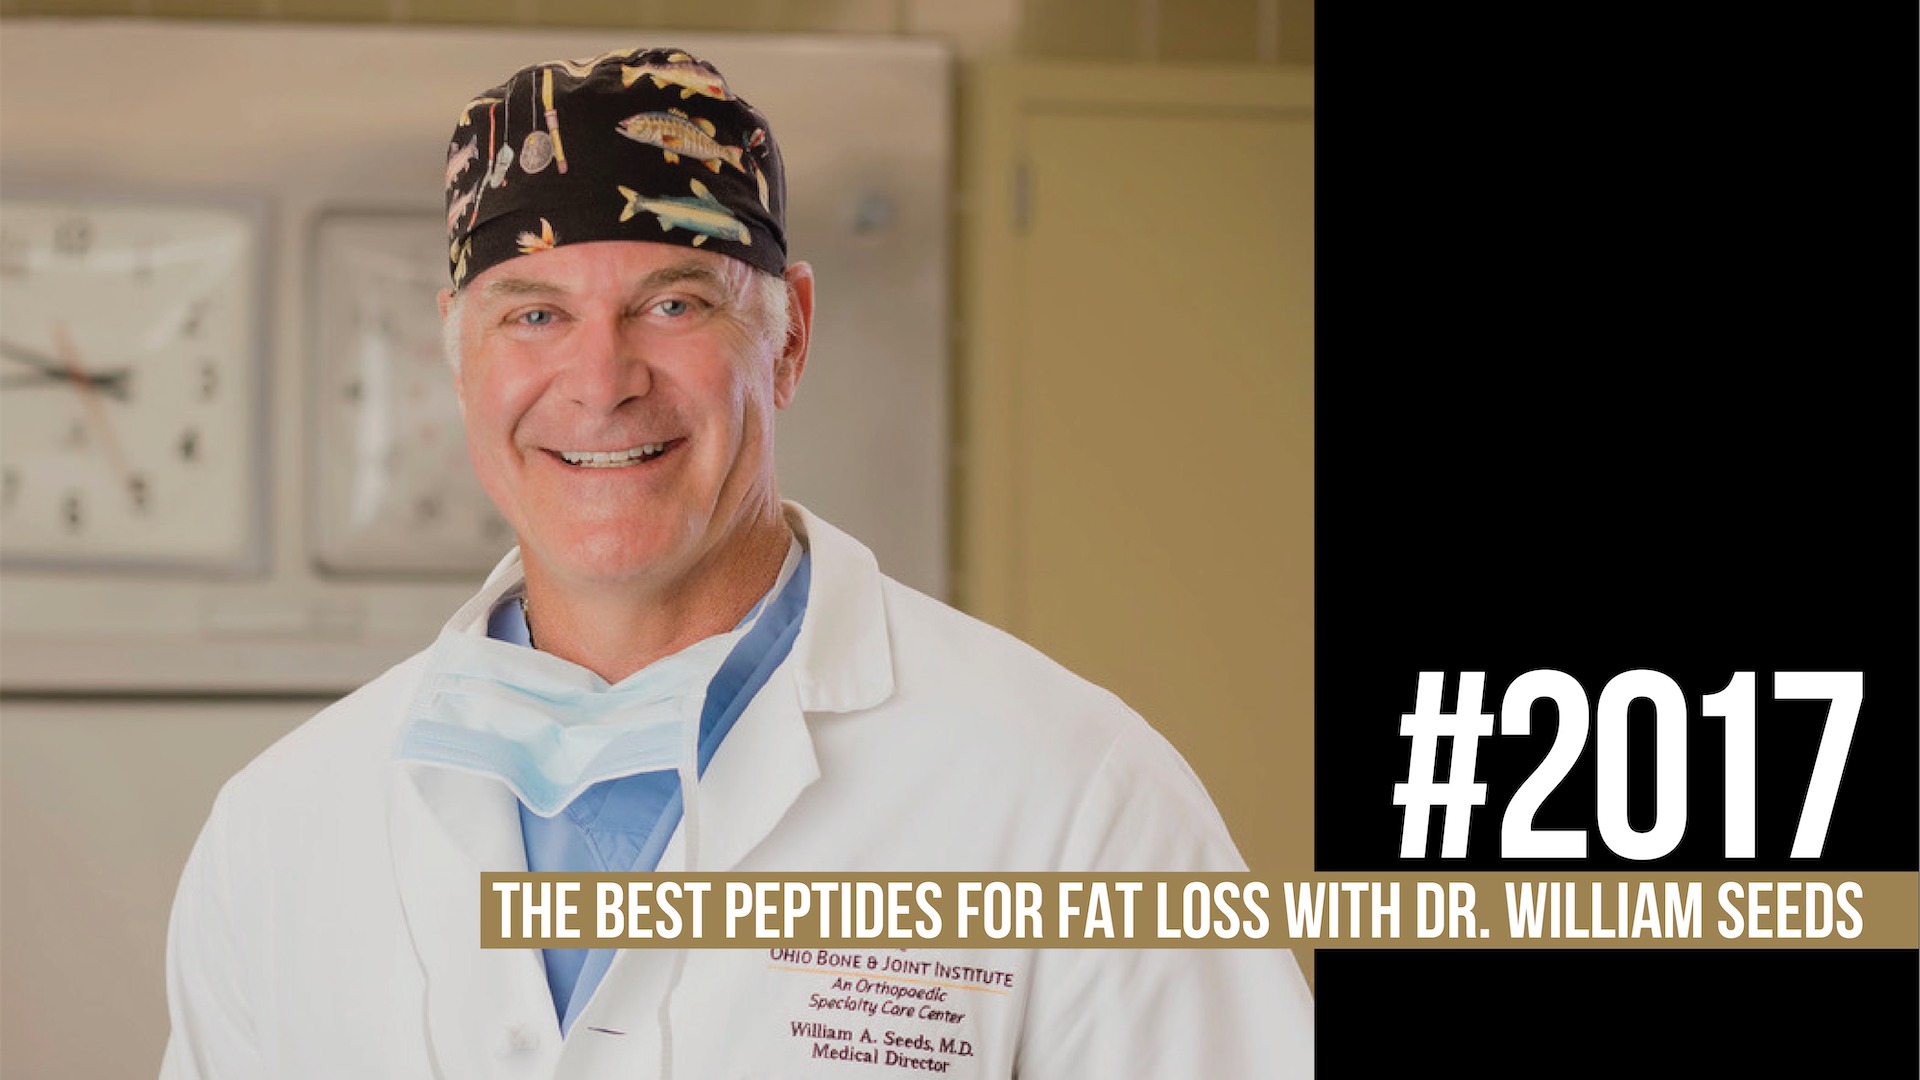 2017: The Best Peptides for Fat Loss With Dr. William Seeds